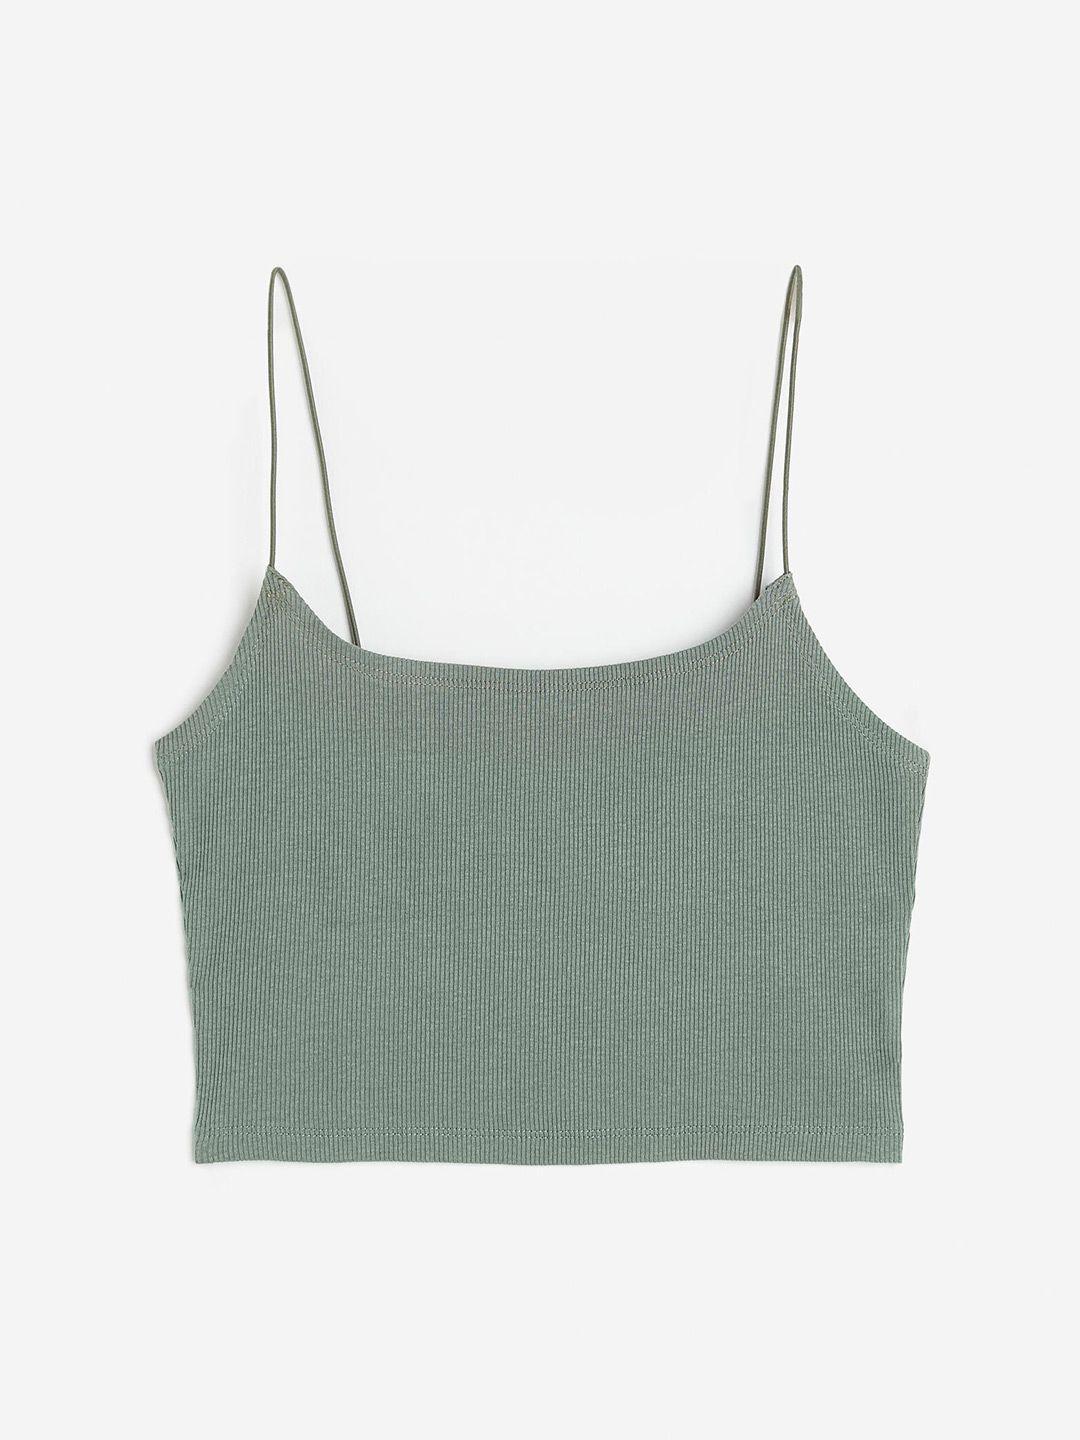 h&m cropped strappy top